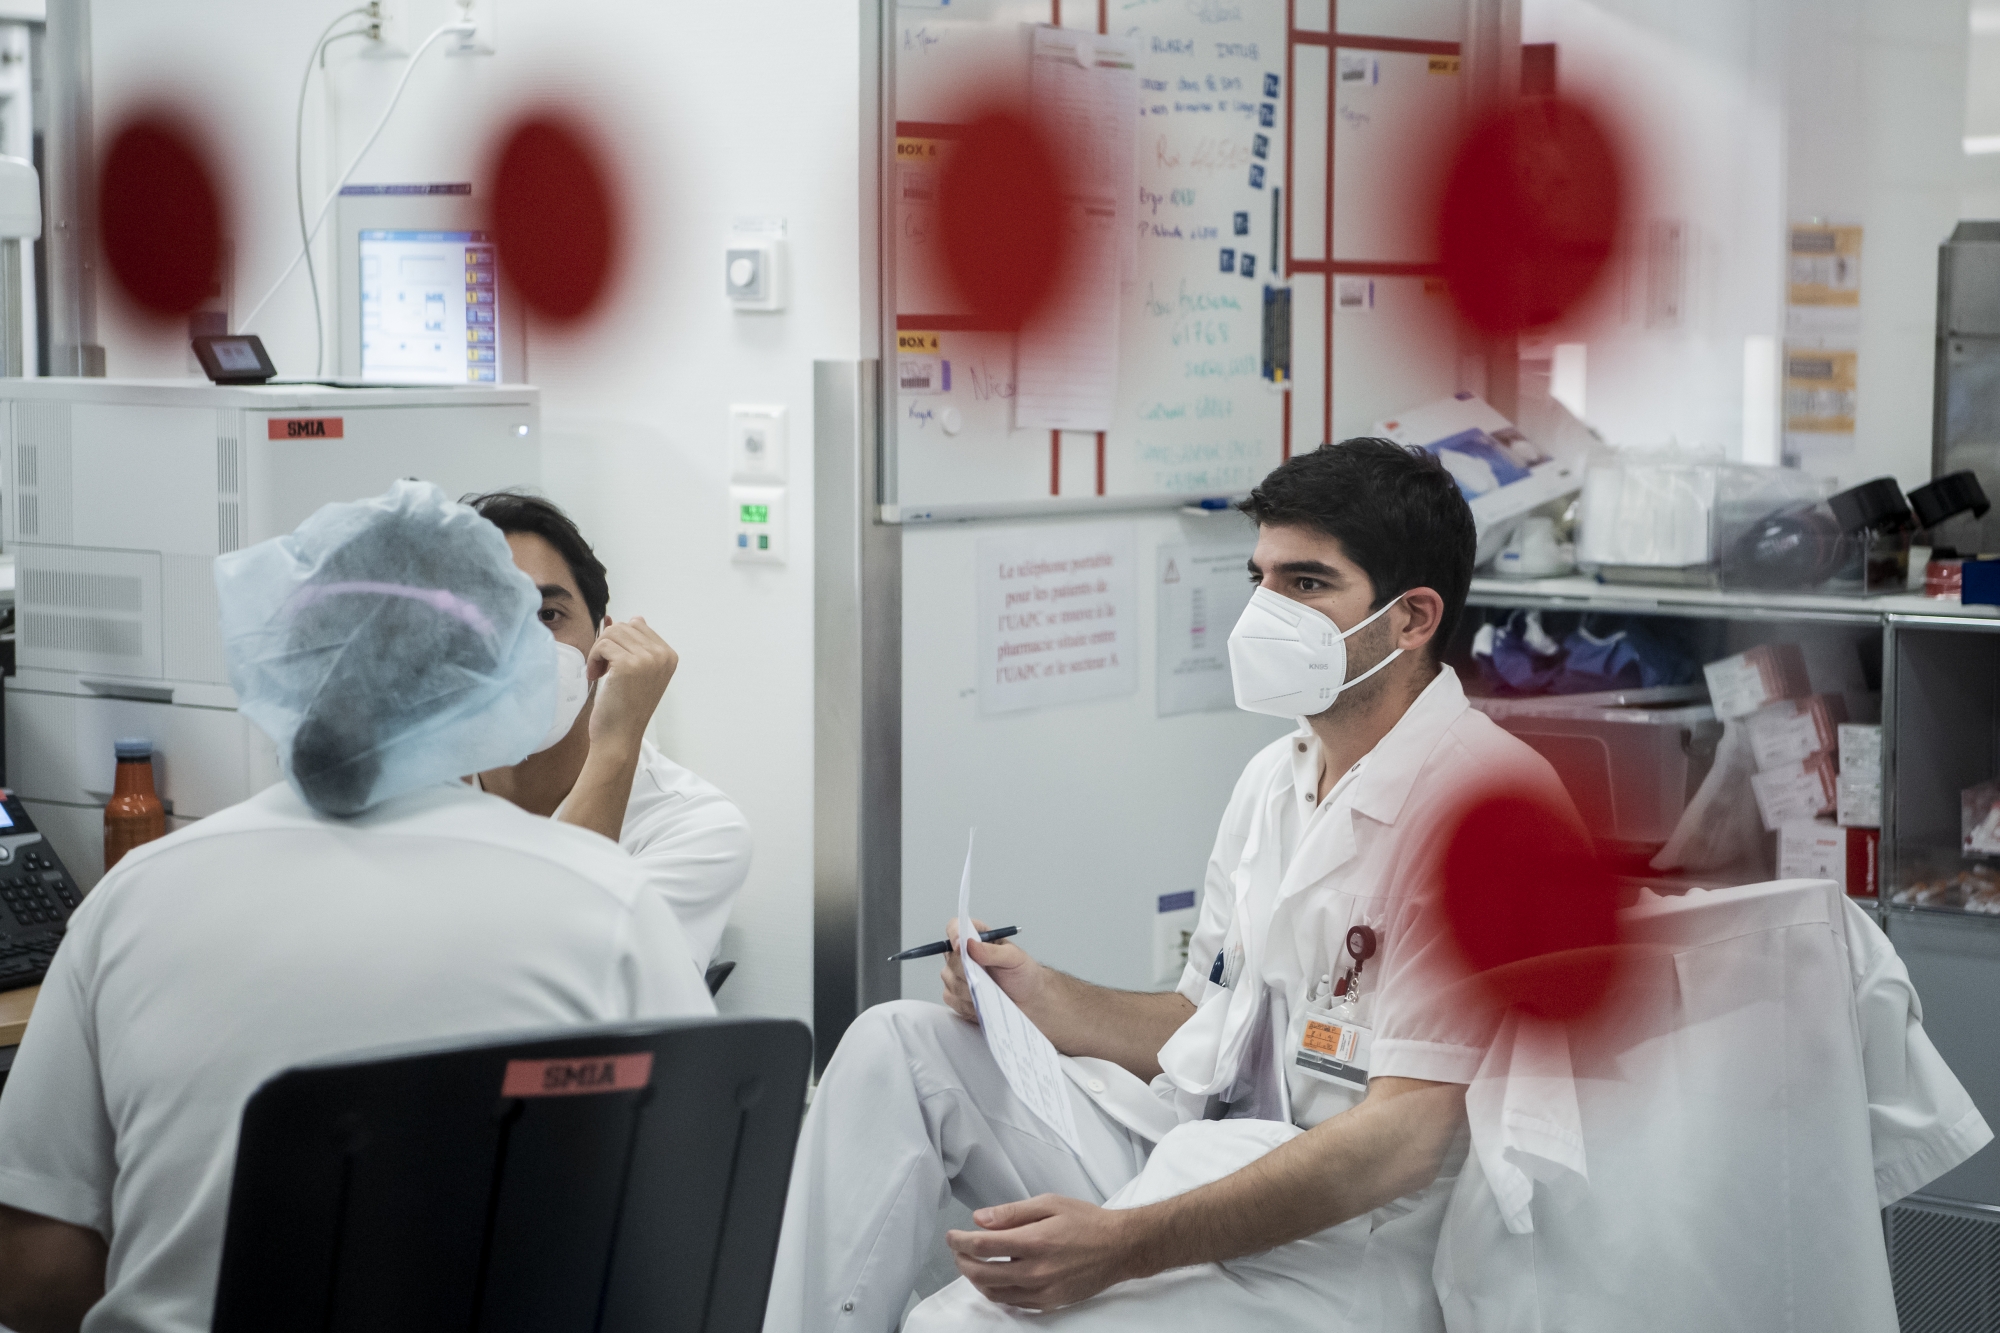 Medical worker attend a meeting in the intensive care unit at the the University Hospital (CHUV) during the coronavirus disease (COVID-19) outbreak in Lausanne, Switzerland, Friday, November 6, 2020. The number of Covid-19 hospitalisations and capacity continues to be a major concern in Switzerland. (KEYSTONE/Jean-Christophe Bott) Le personnel soignant en discussion pendant une reunion dans l'unite des soins intensifs du Centre Hospitalier Universitaire Vaudois, CHUV, lors de la crise du Coronavirus (Covid-19) le vendredi 6 novembre 2020 a Lausanne. (KEYSTONE/Jean-Christophe Bott)